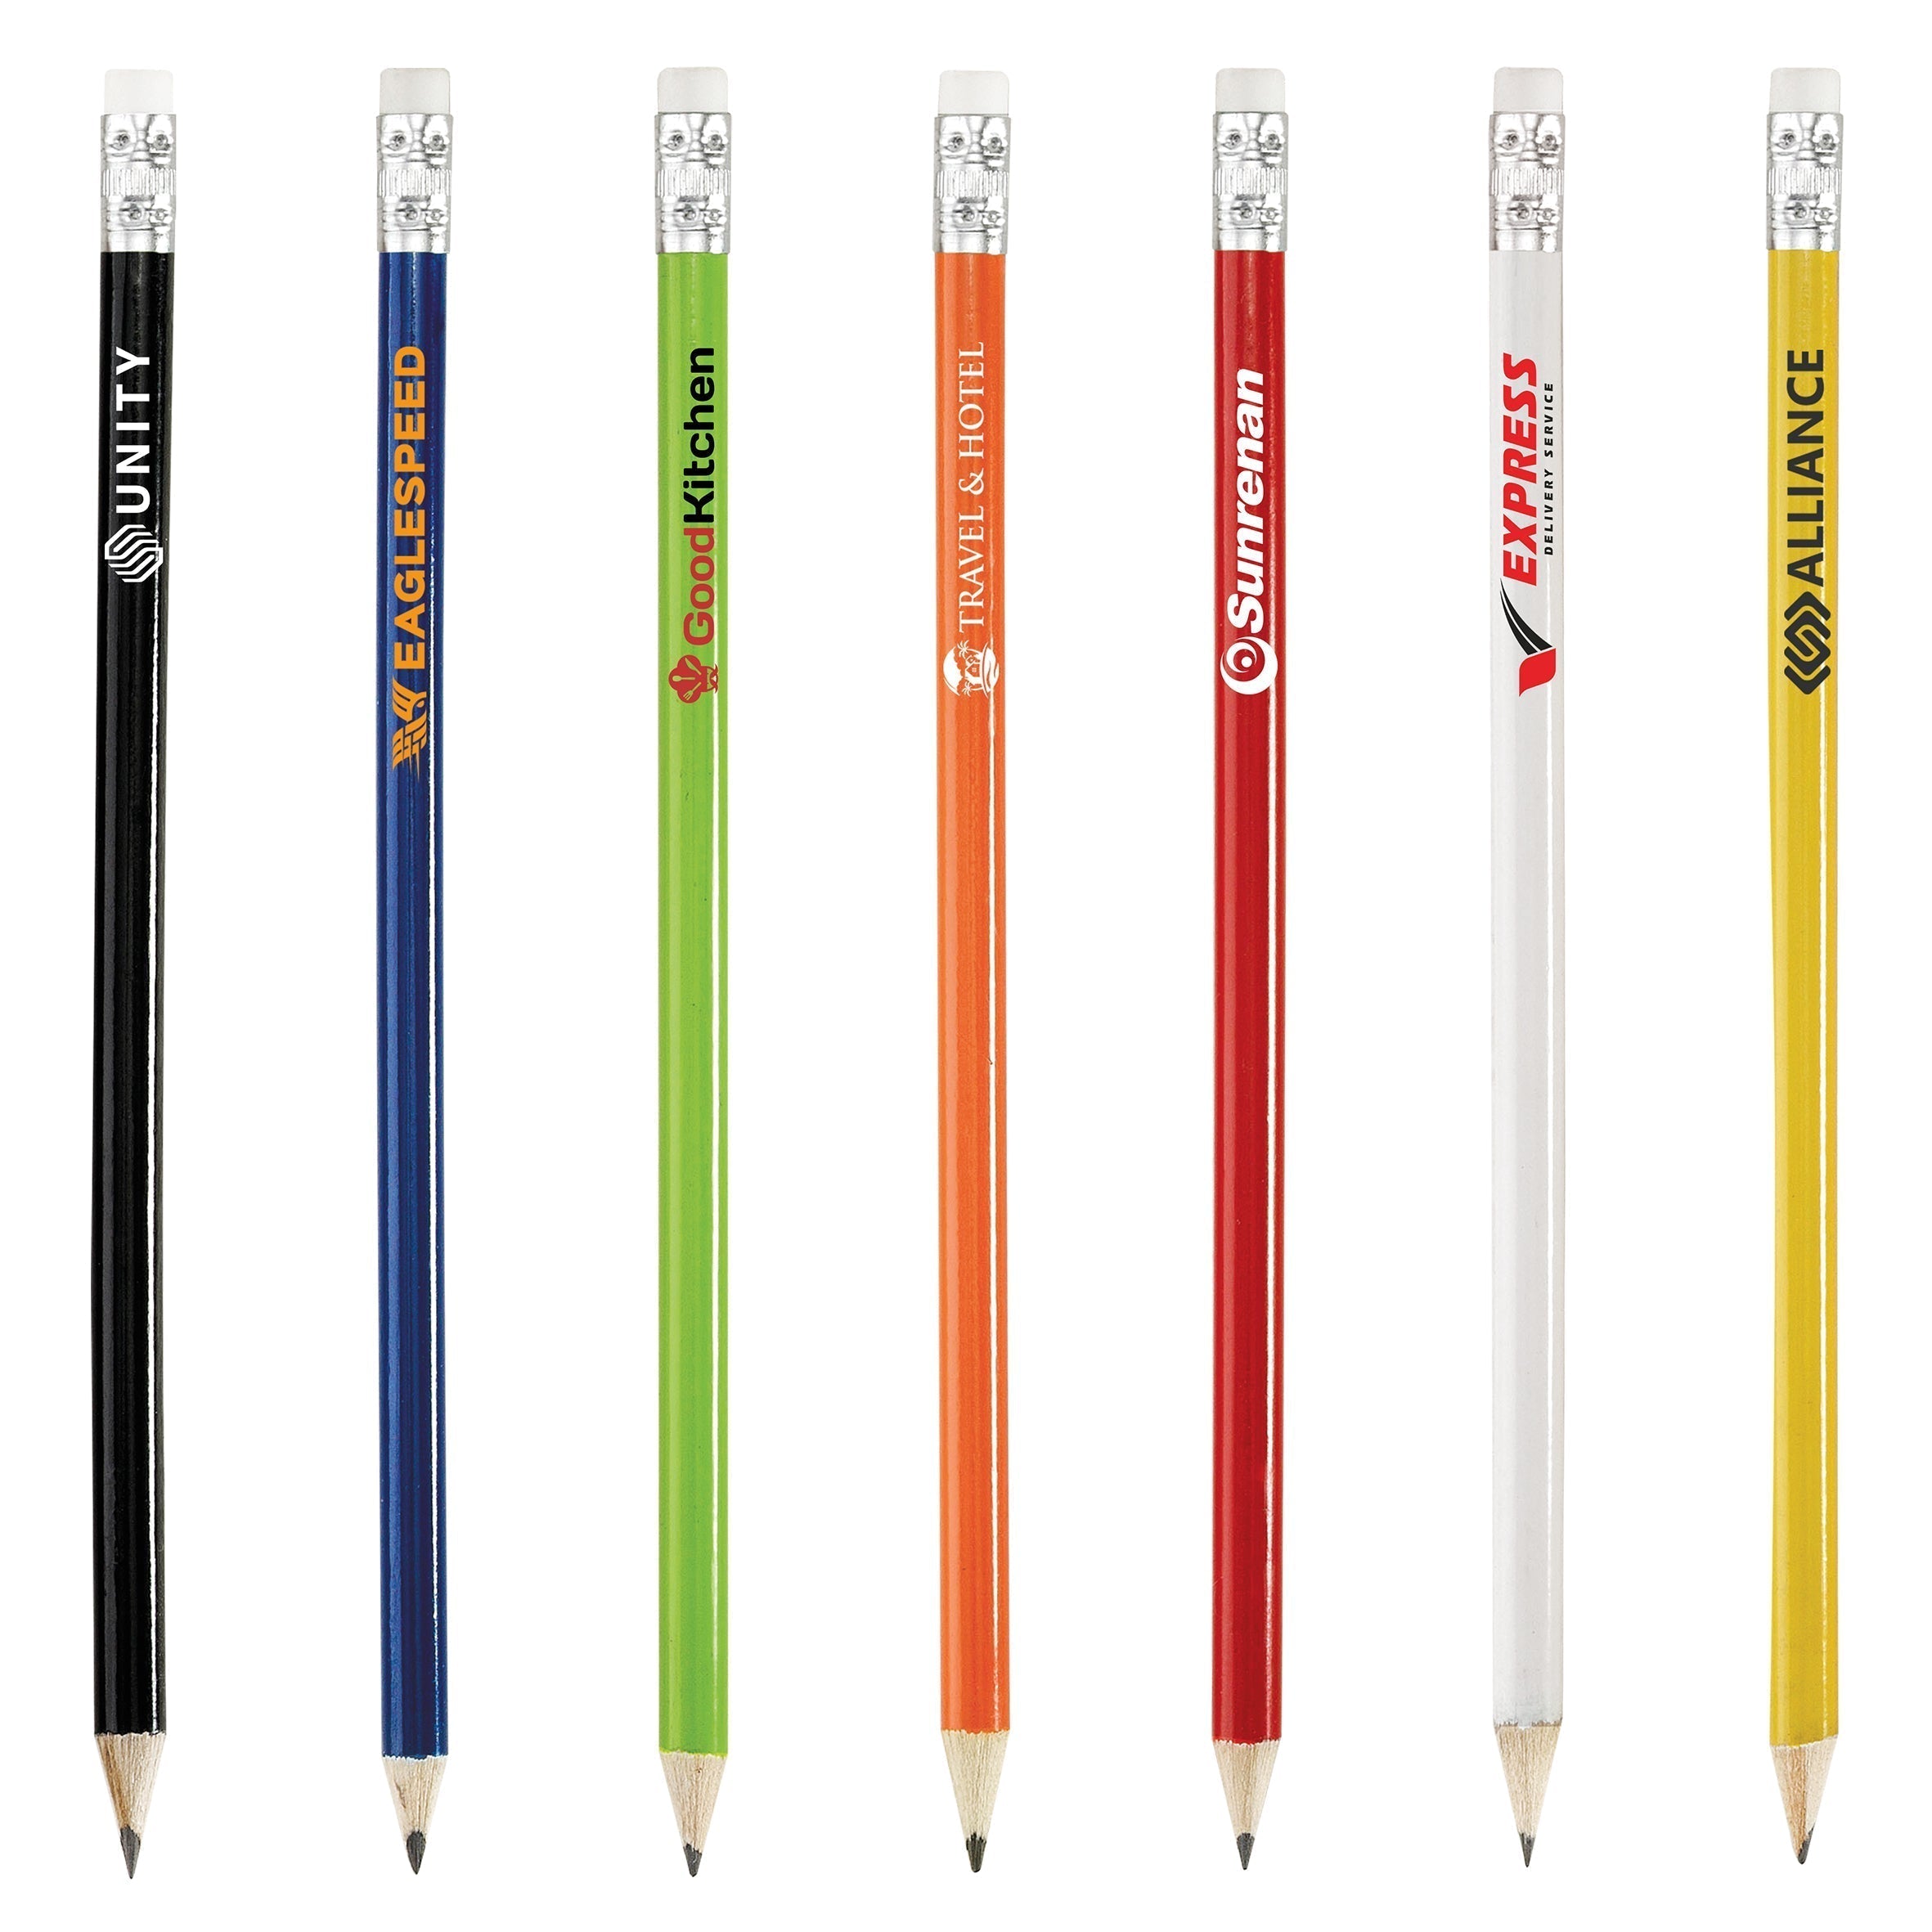 Basix Pencil (Sharpened)-Solid White-SW